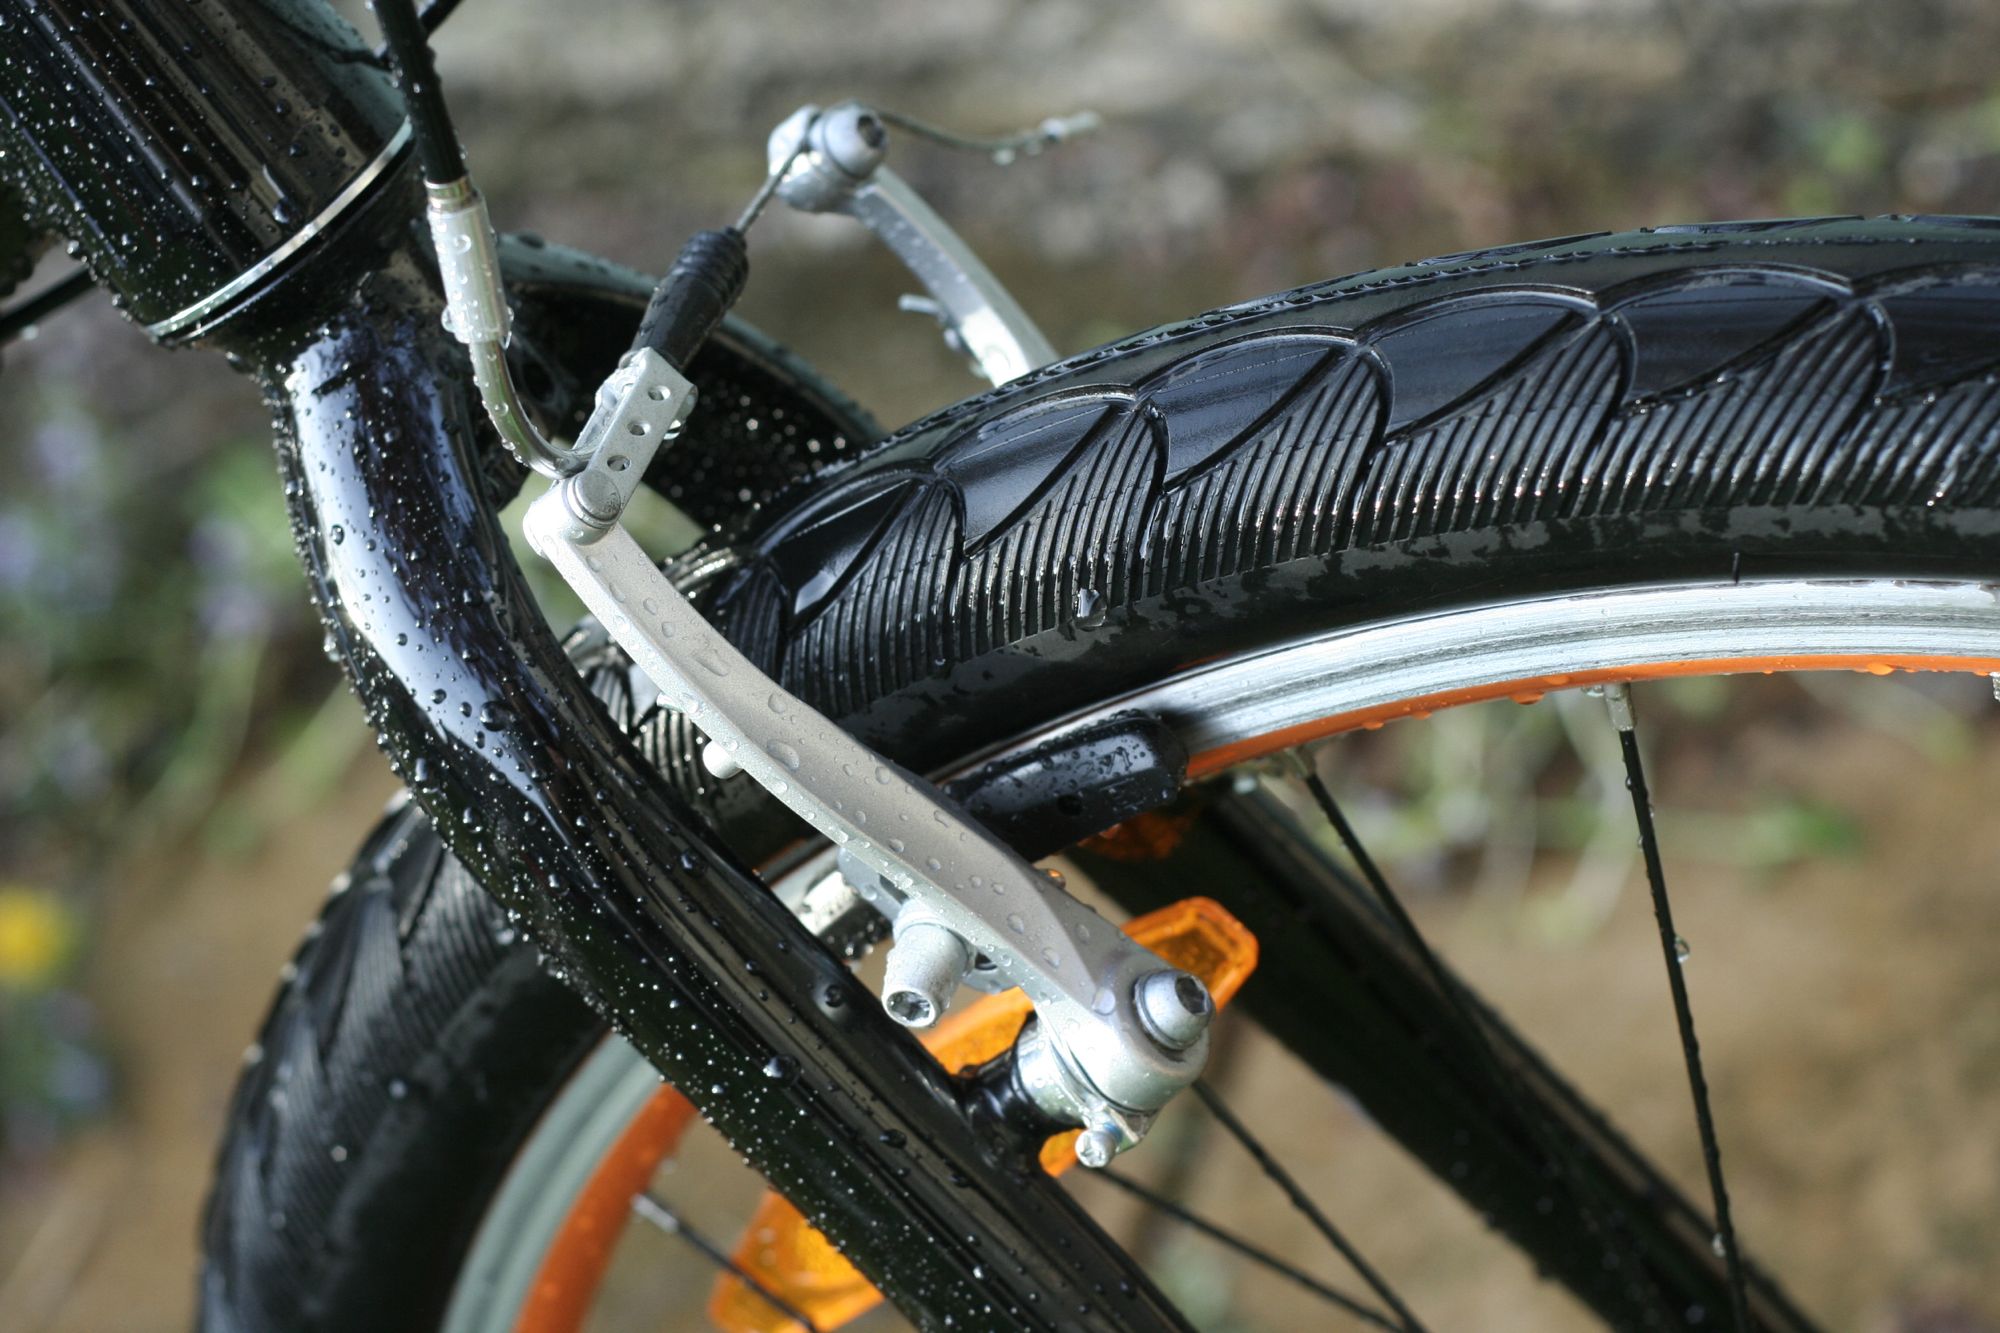 electra townie bicycle accessories